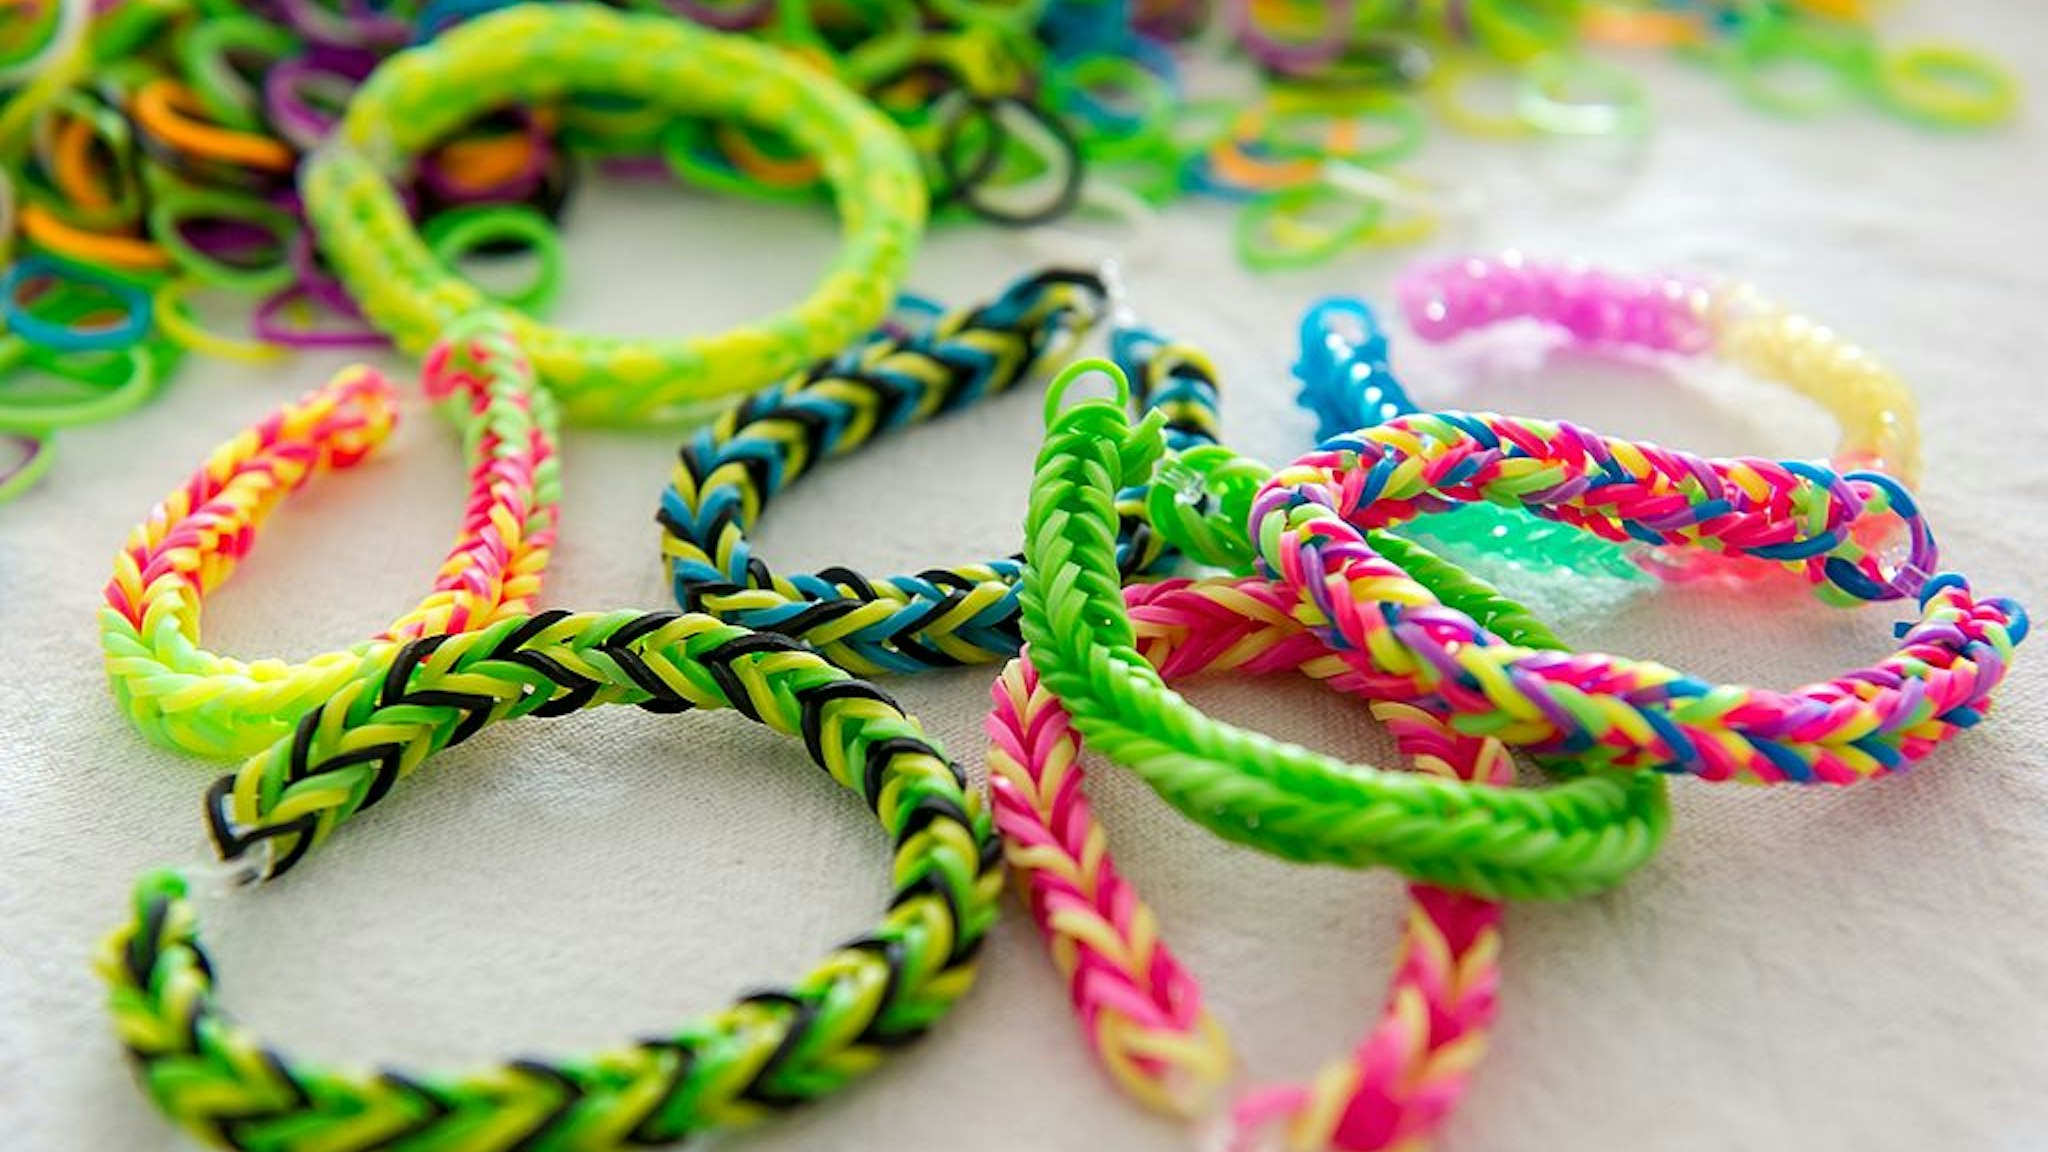 A photo taken on July 23, 2014 in Lille, northern France, shows "Rainbow Loom" bracelets. "Rainbow Loom" bracelets, made with coloured small elastic bands woven, are the new fashion imported from the United States. AFP PHOTO / PHILIPPE HUGUEN (Photo credit should read PHILIPPE HUGUEN/AFP via Getty Images)